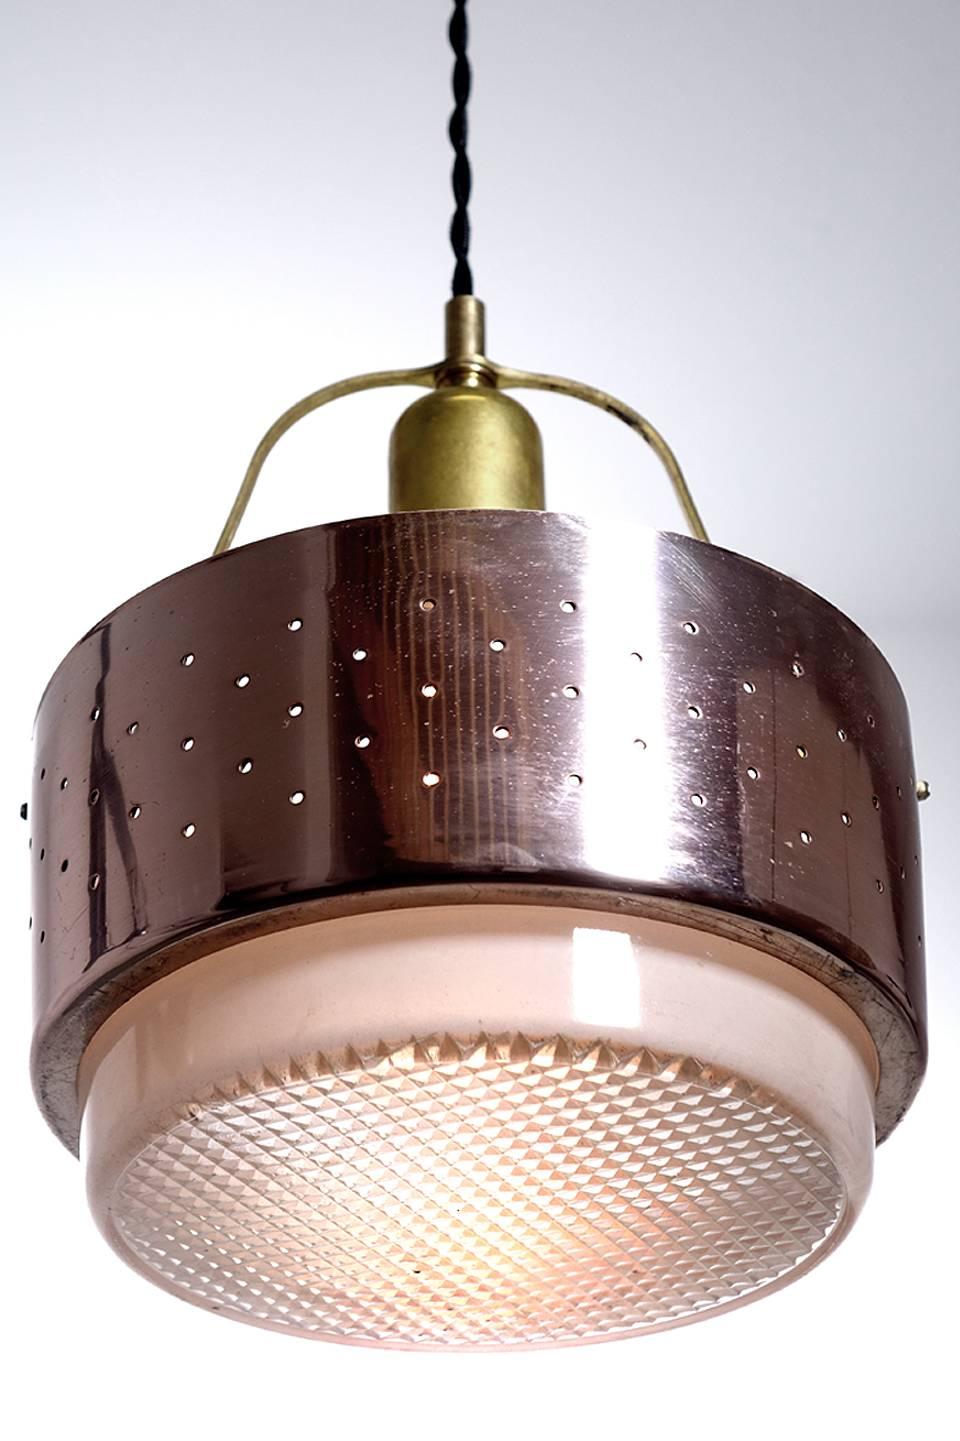 We have a collection of these unique simple Mid-Century Modern lamps. It consists of a perforated copper ring with a thick waffle pattern glass lens. It hangs from a brass bow and center socket. There is a nice open look to the whole design and they